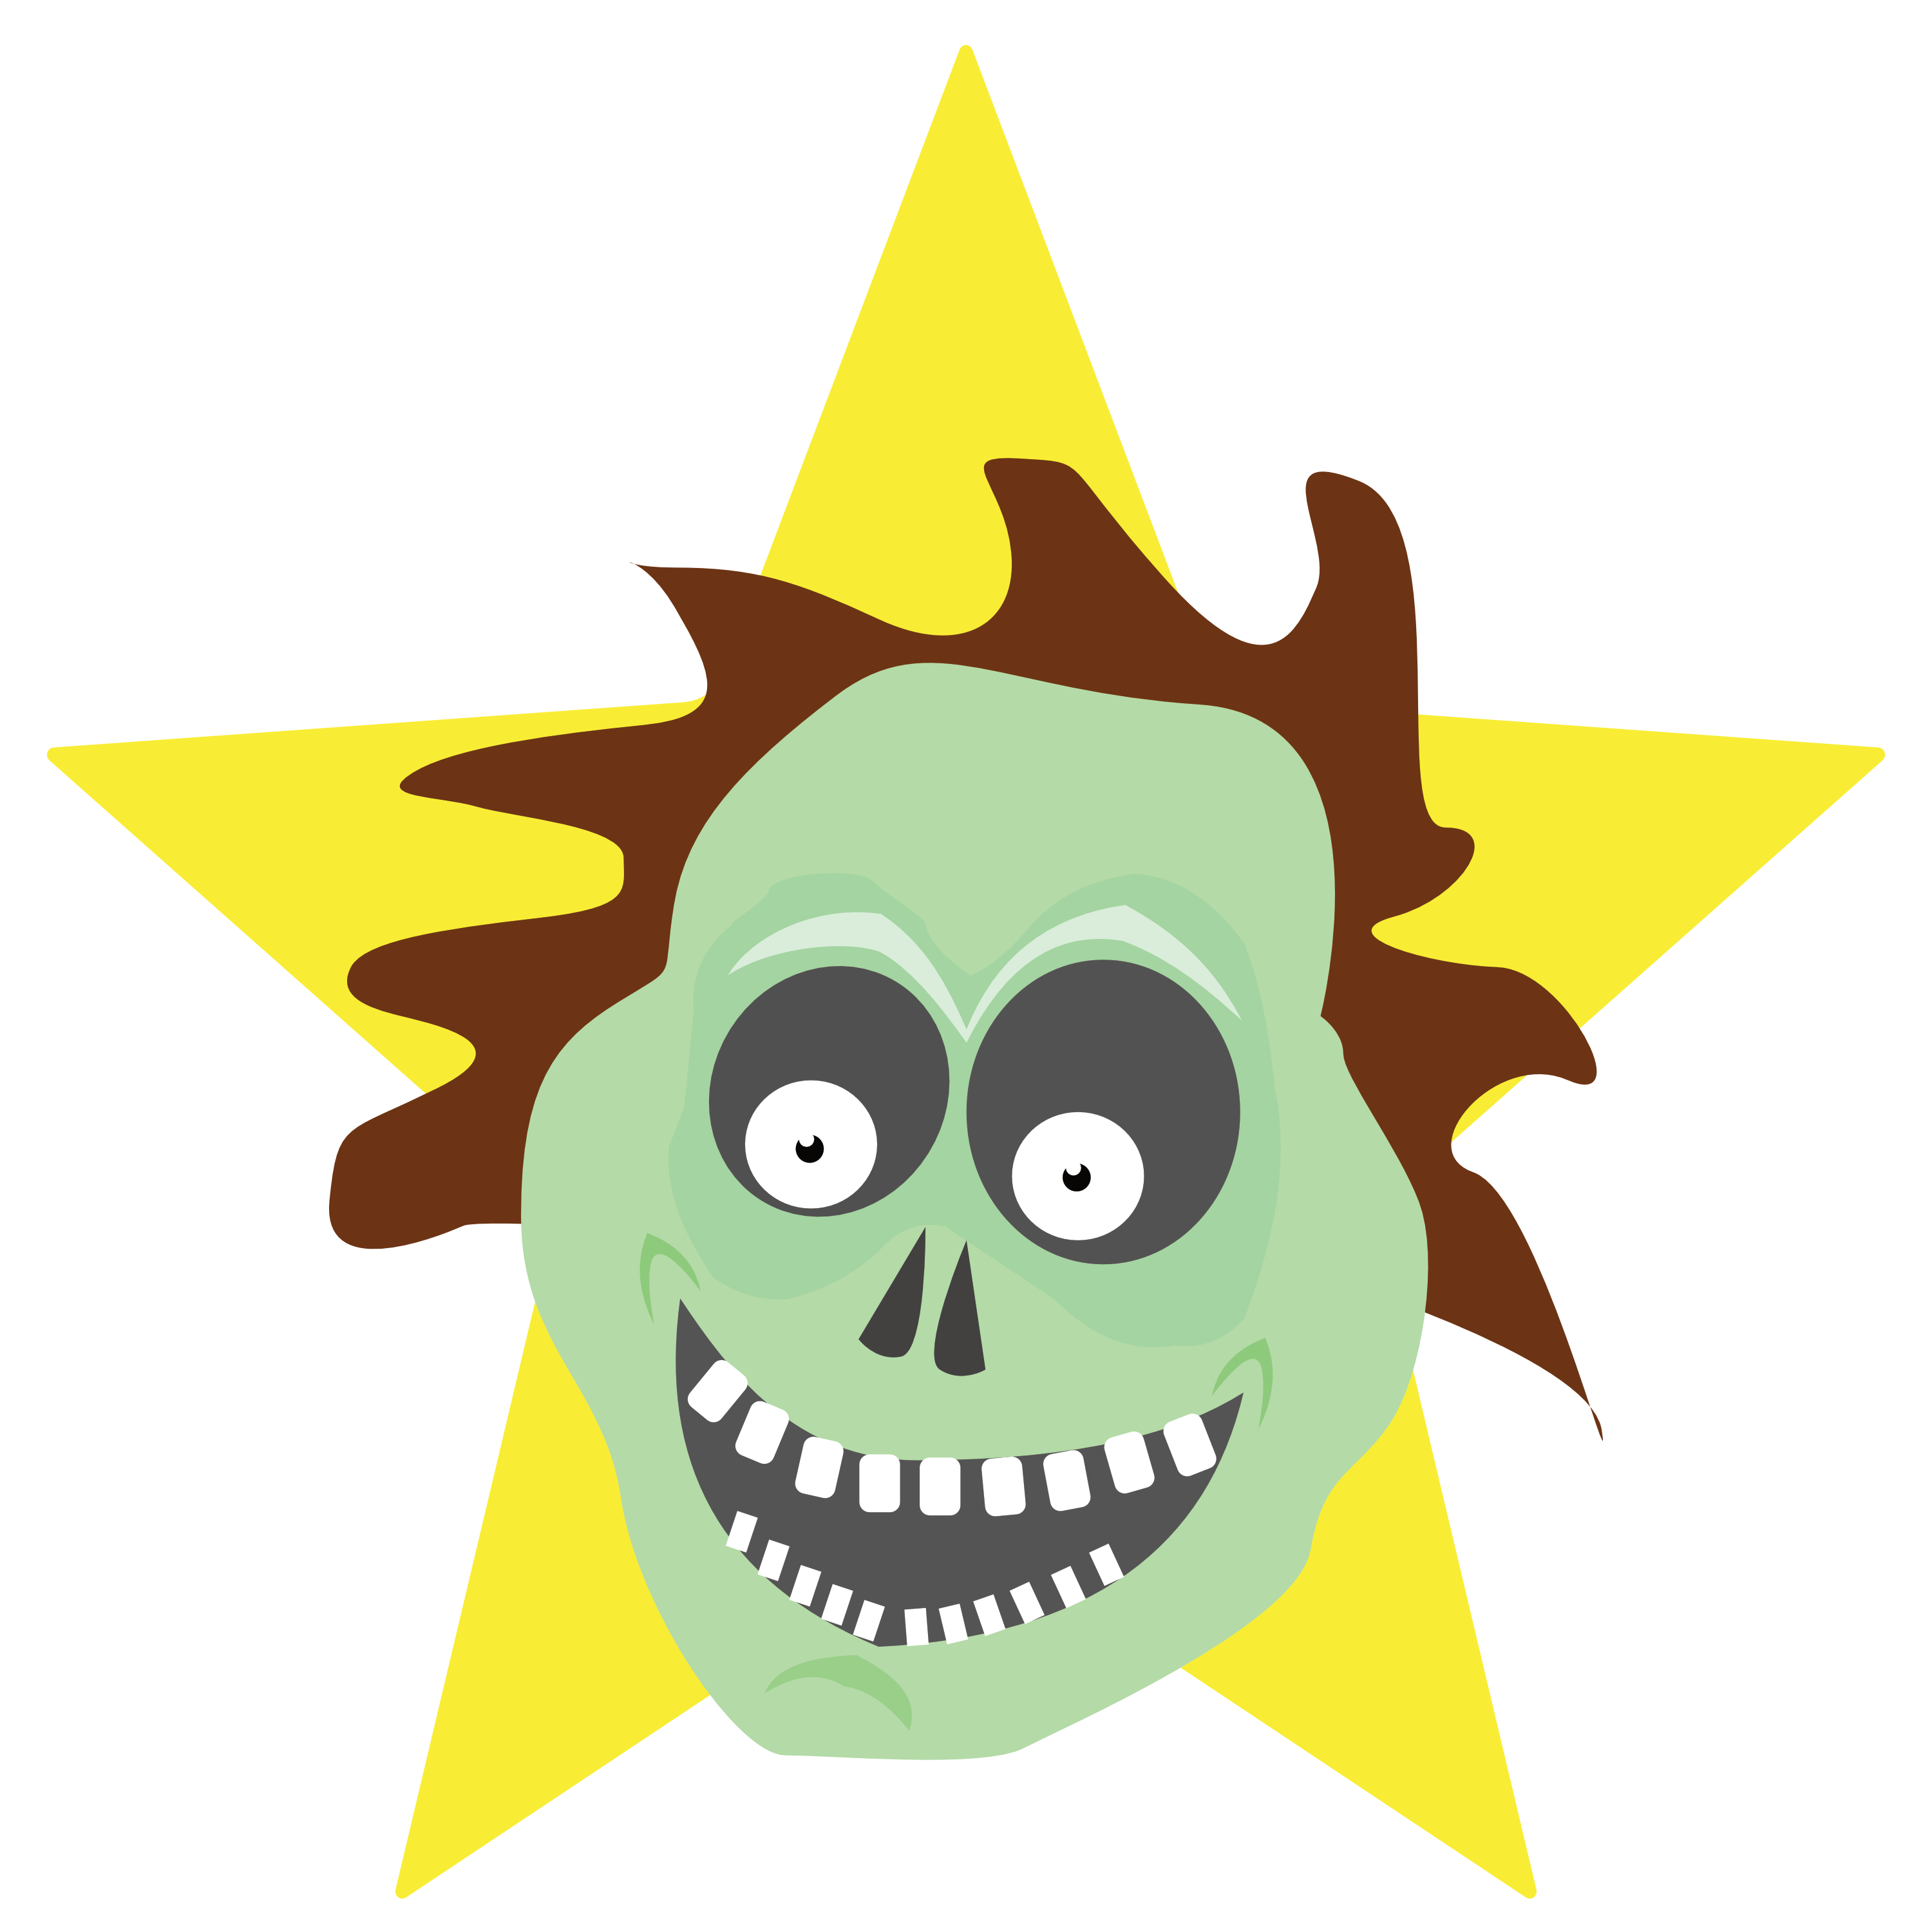 Patchy the zombie is a star.